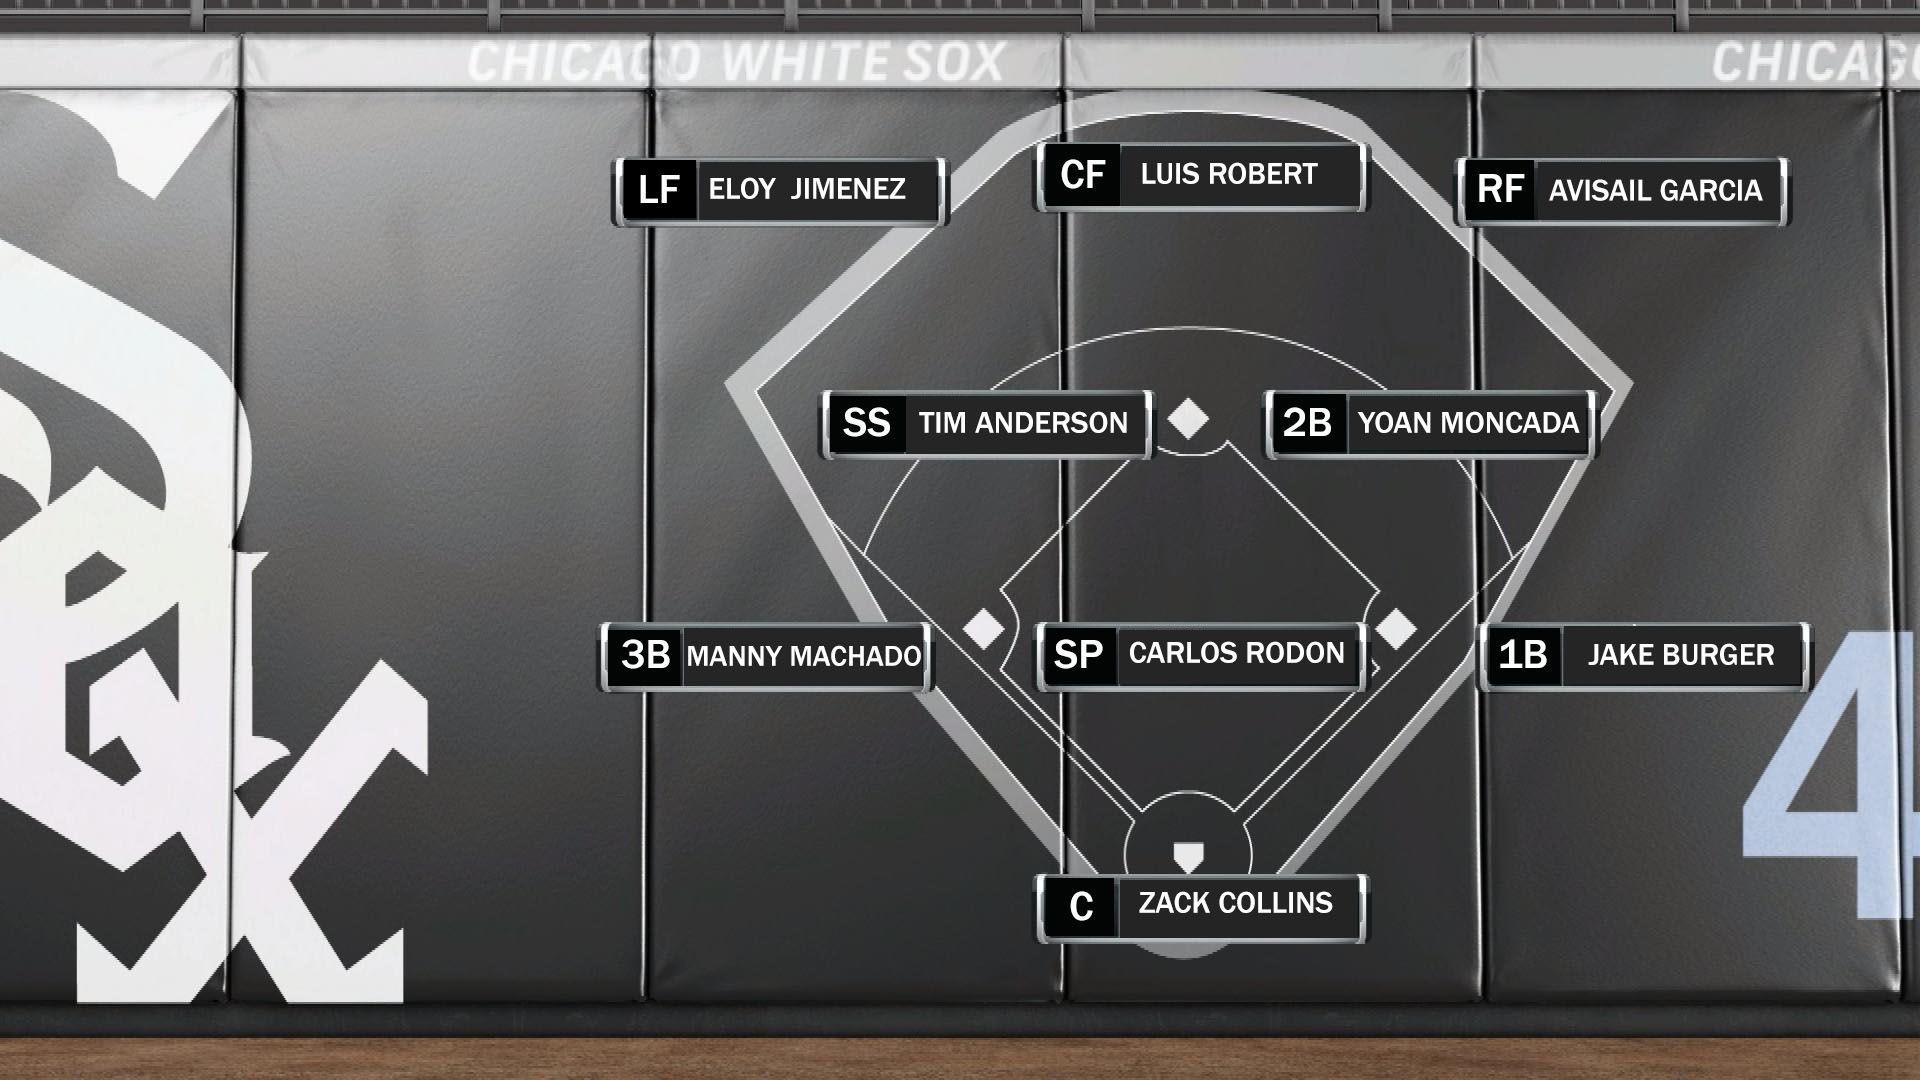 20 Vision: Dreaming Of Roster For White Sox Next World Series